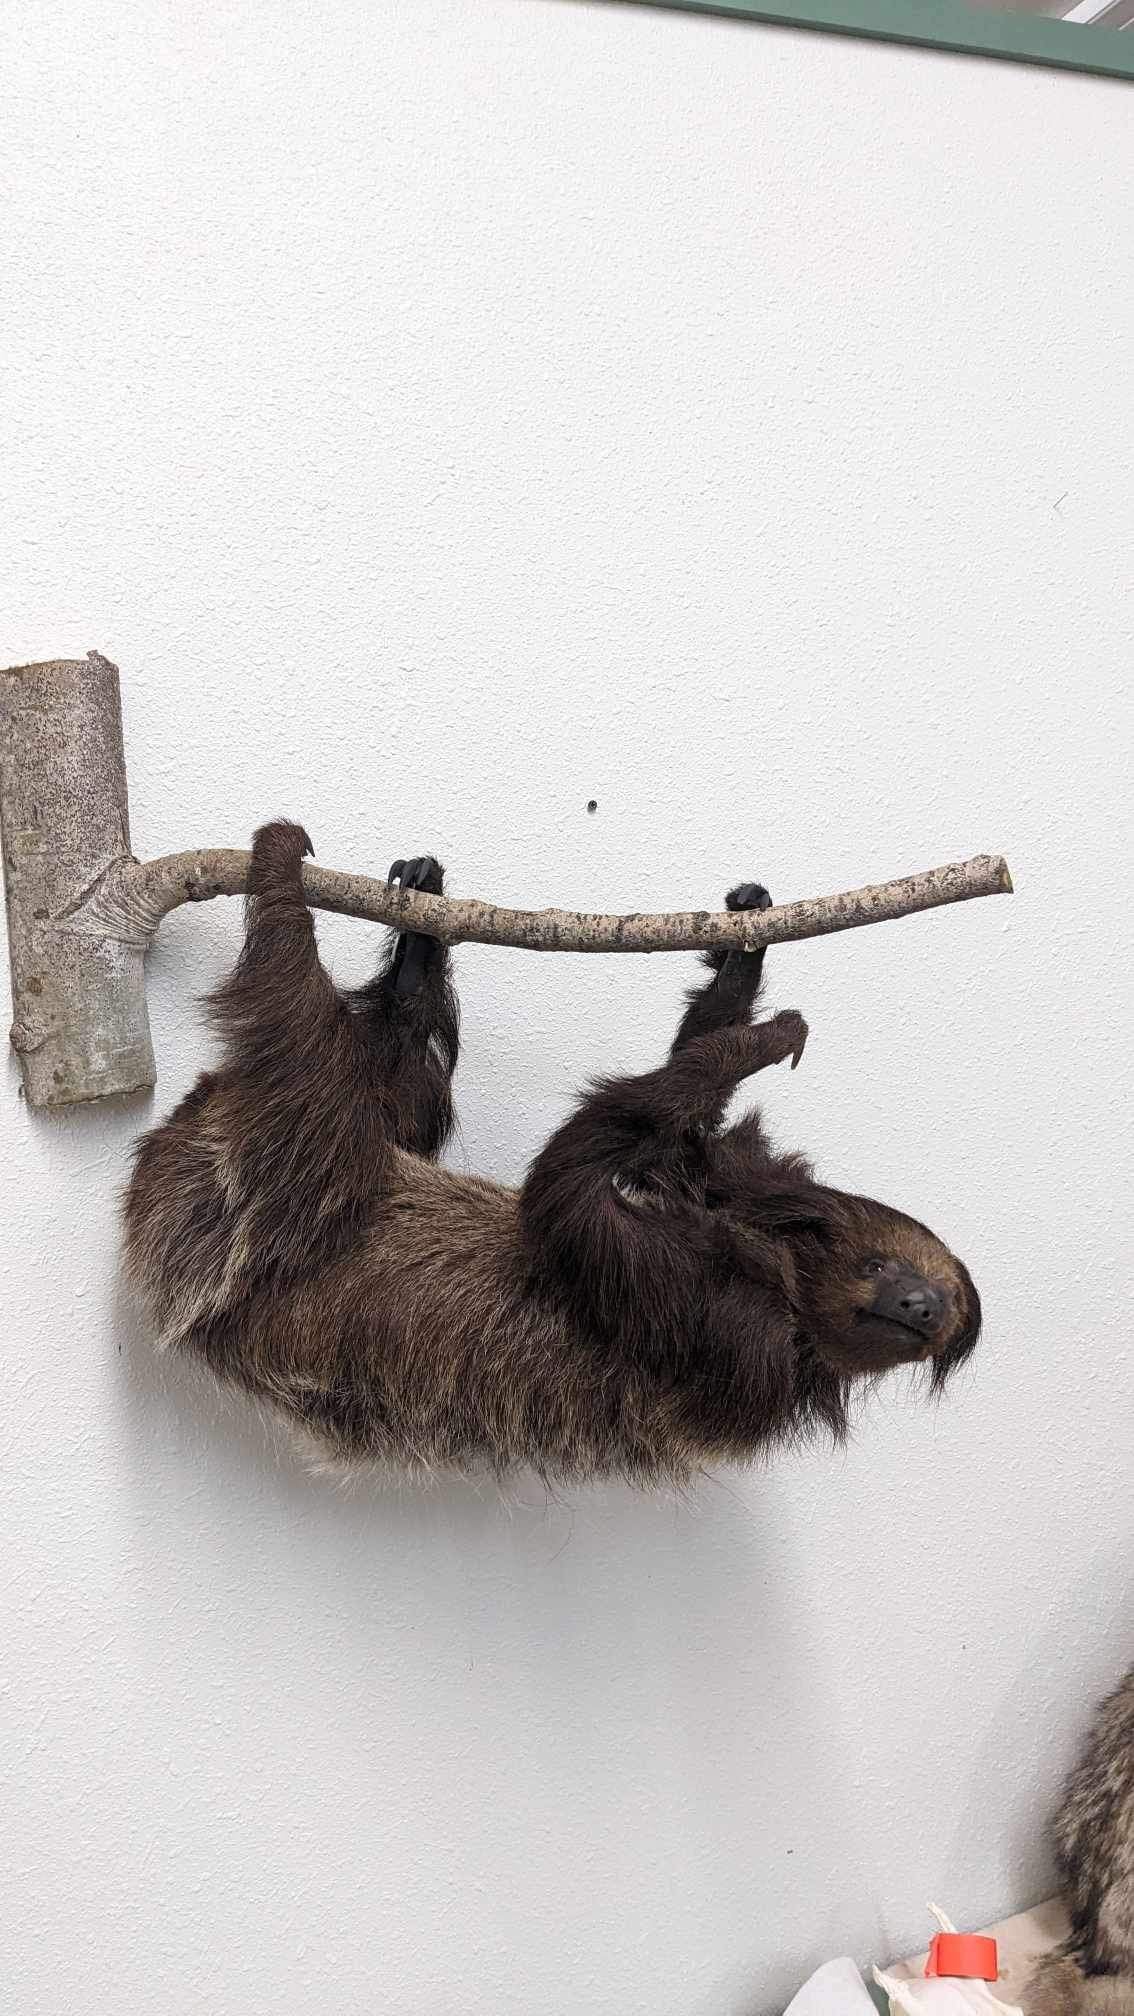 New Excellent Adult Sloth Taxidermy Wall Mount Full Body